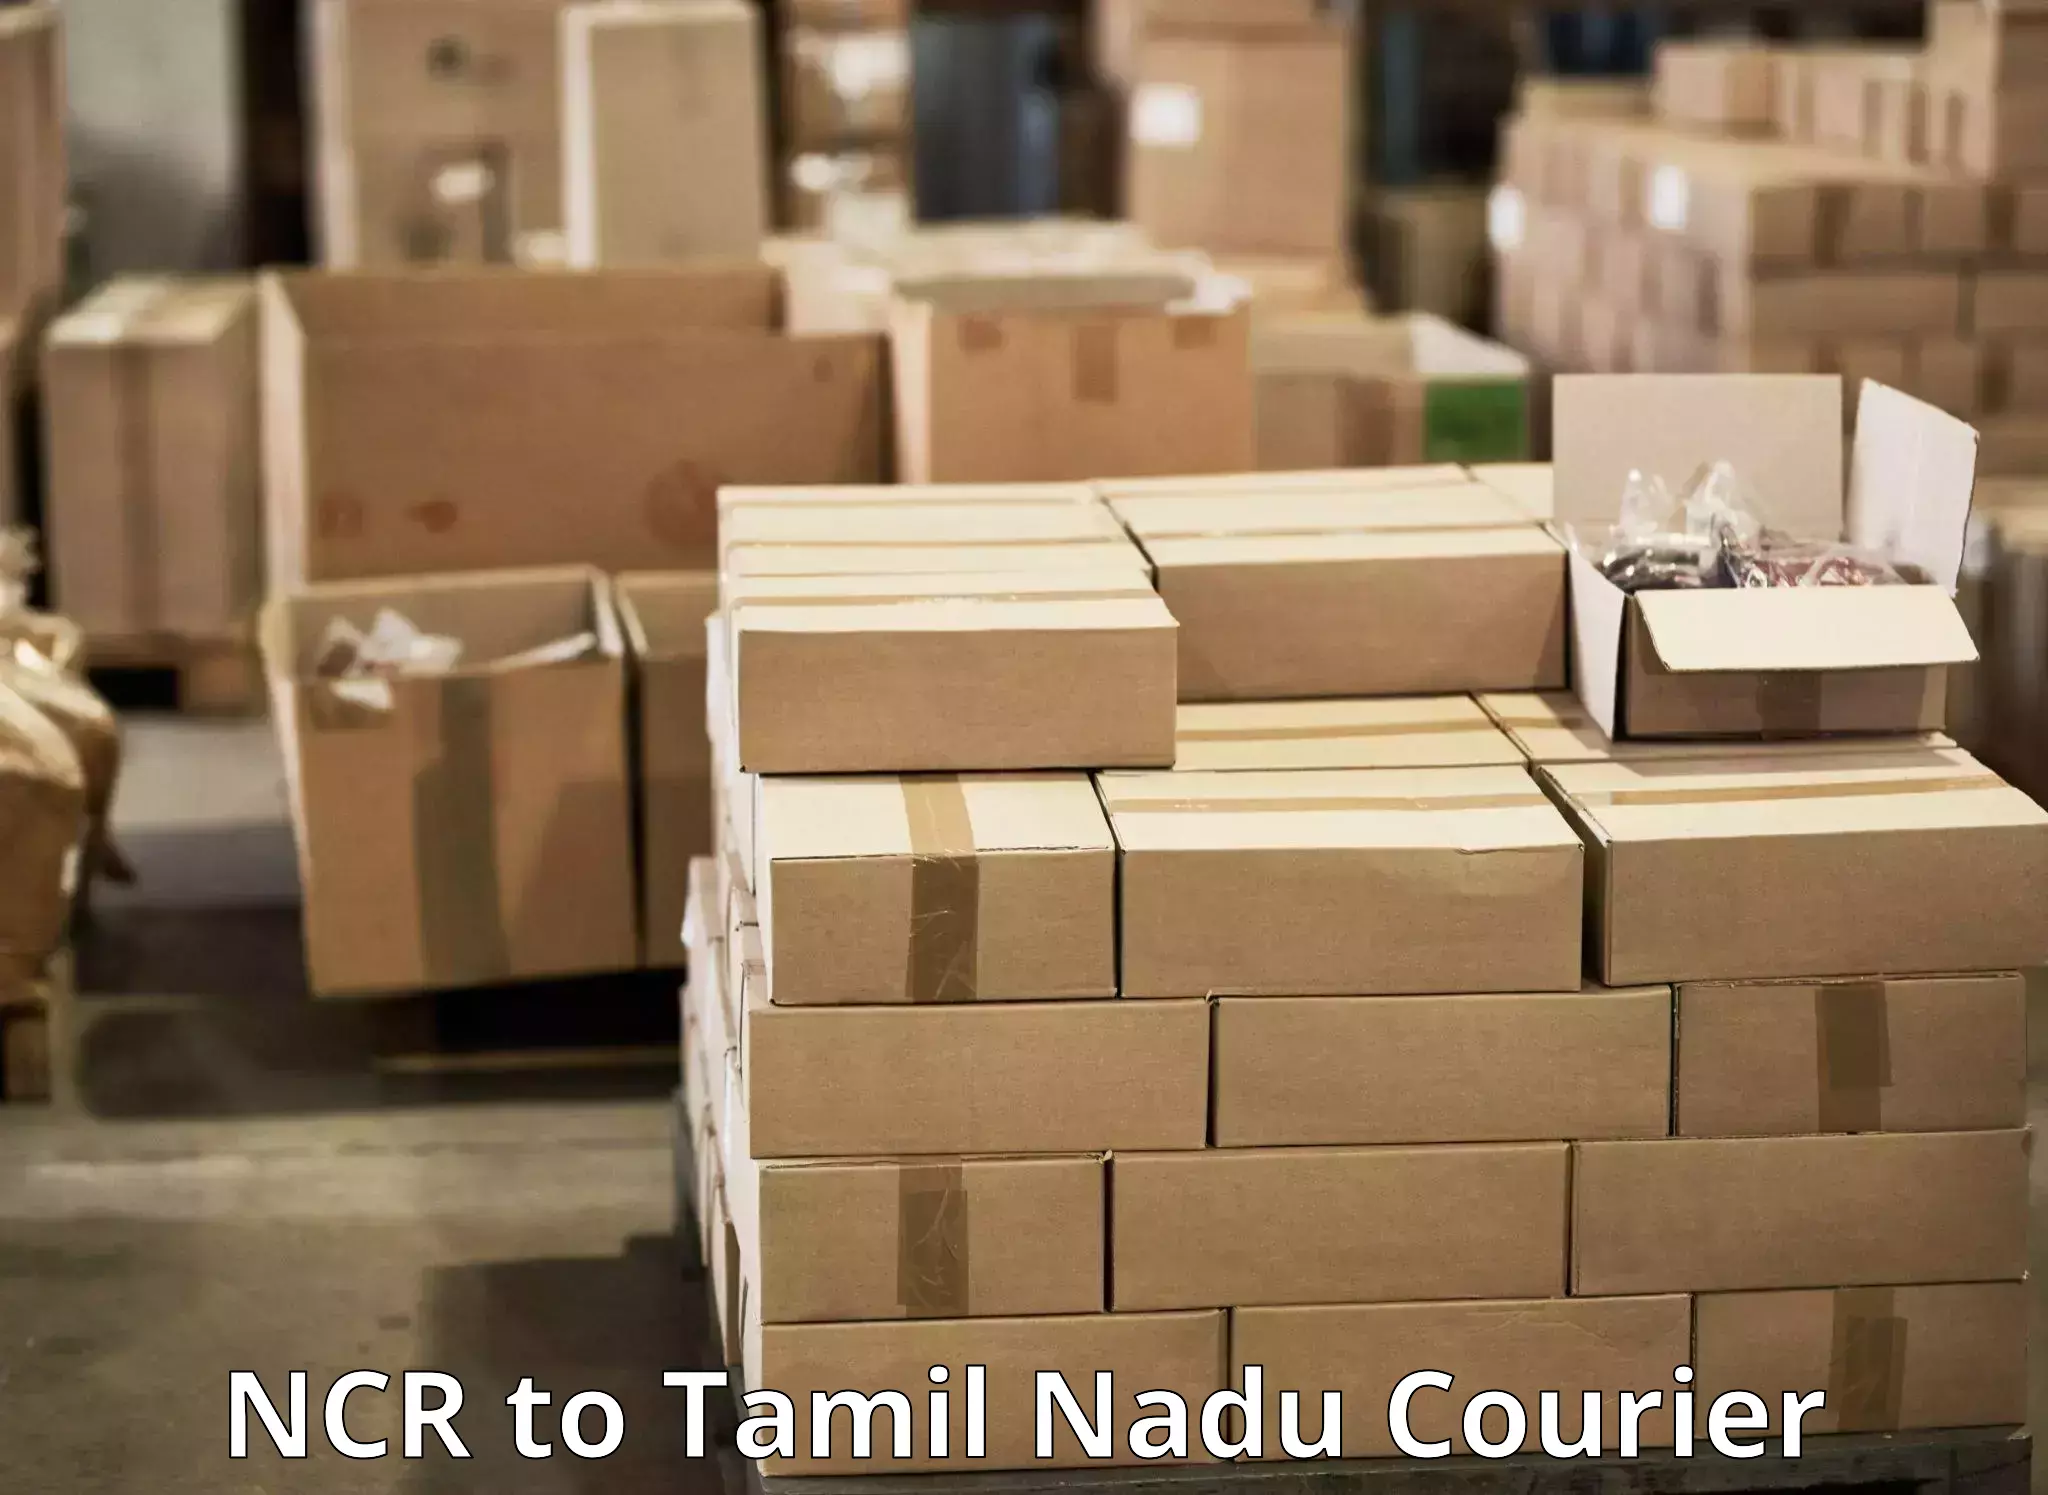 Expedited parcel delivery NCR to Melur